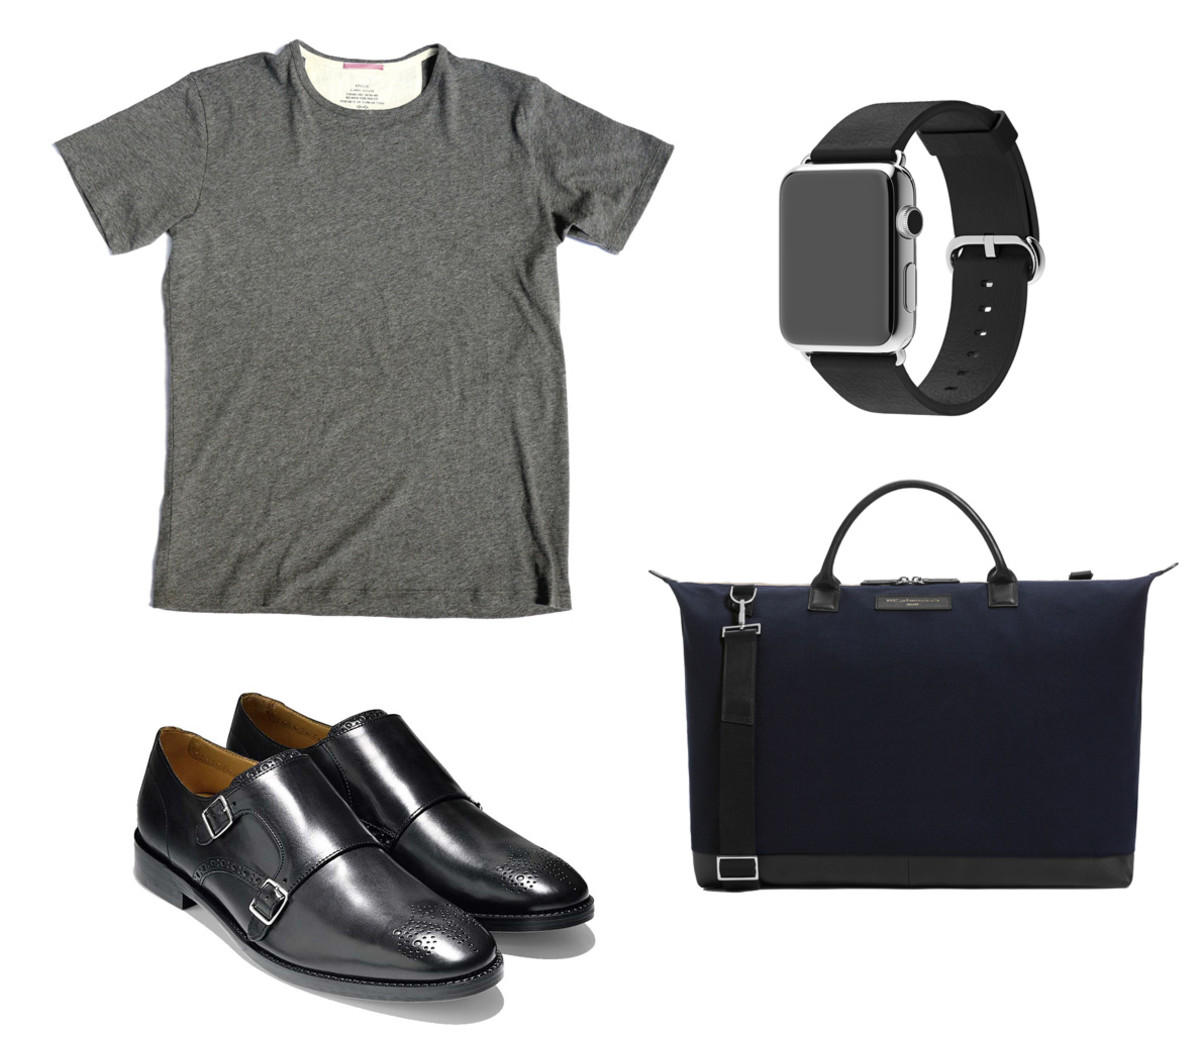 5 Must-Have Bag Styles for Men – Inside The Closet